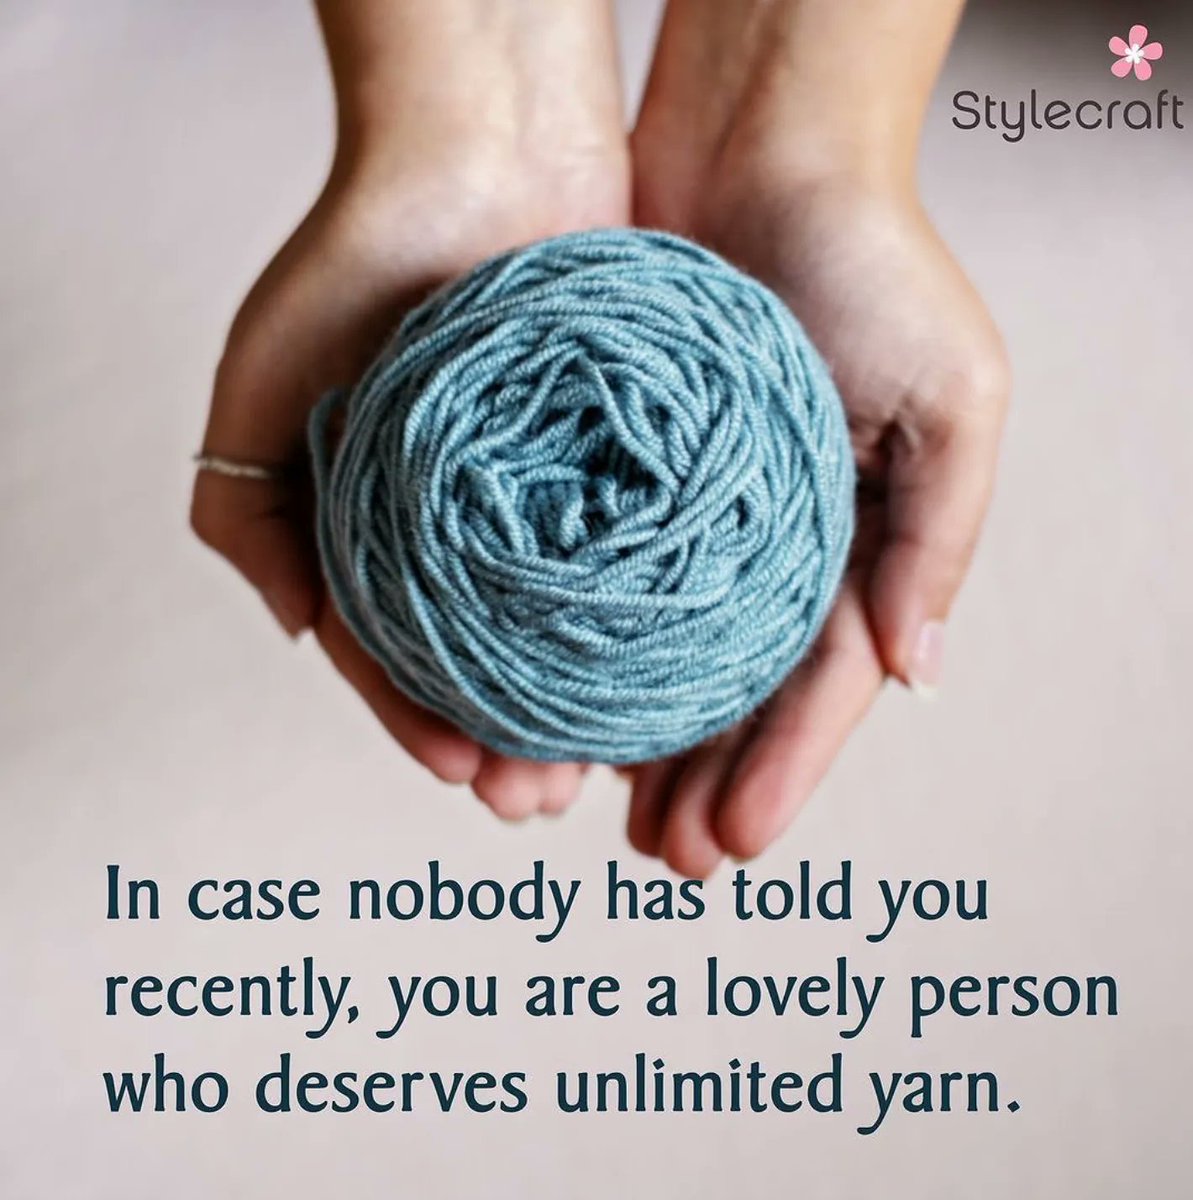 To all of you in need of some yarn love.

Image source: Stylecraft
#KnittingMemeMonday #KnittingMemes